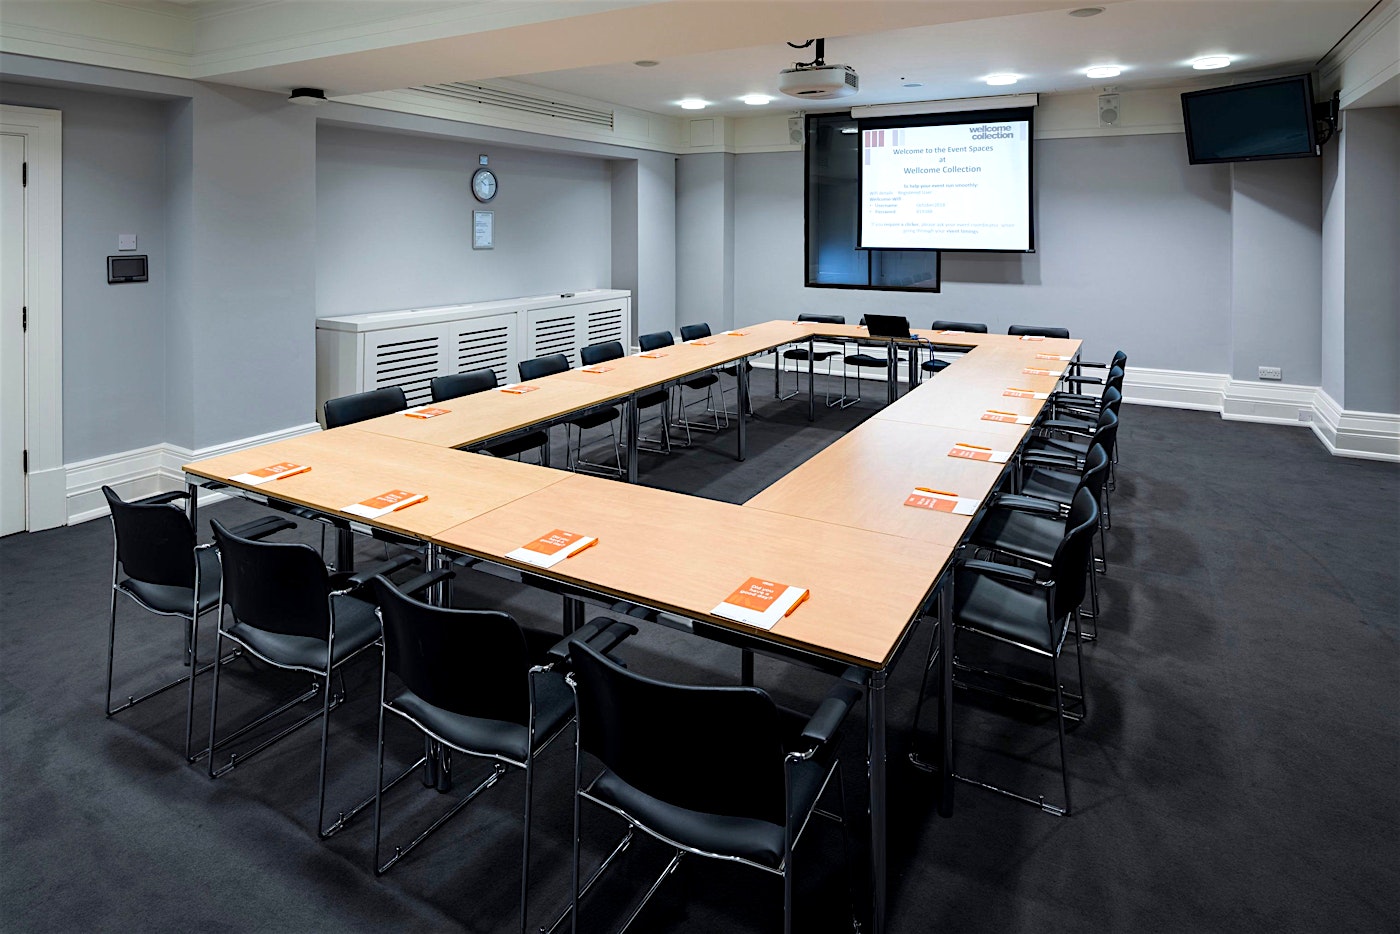 Wellcome Collection Steel Room training room